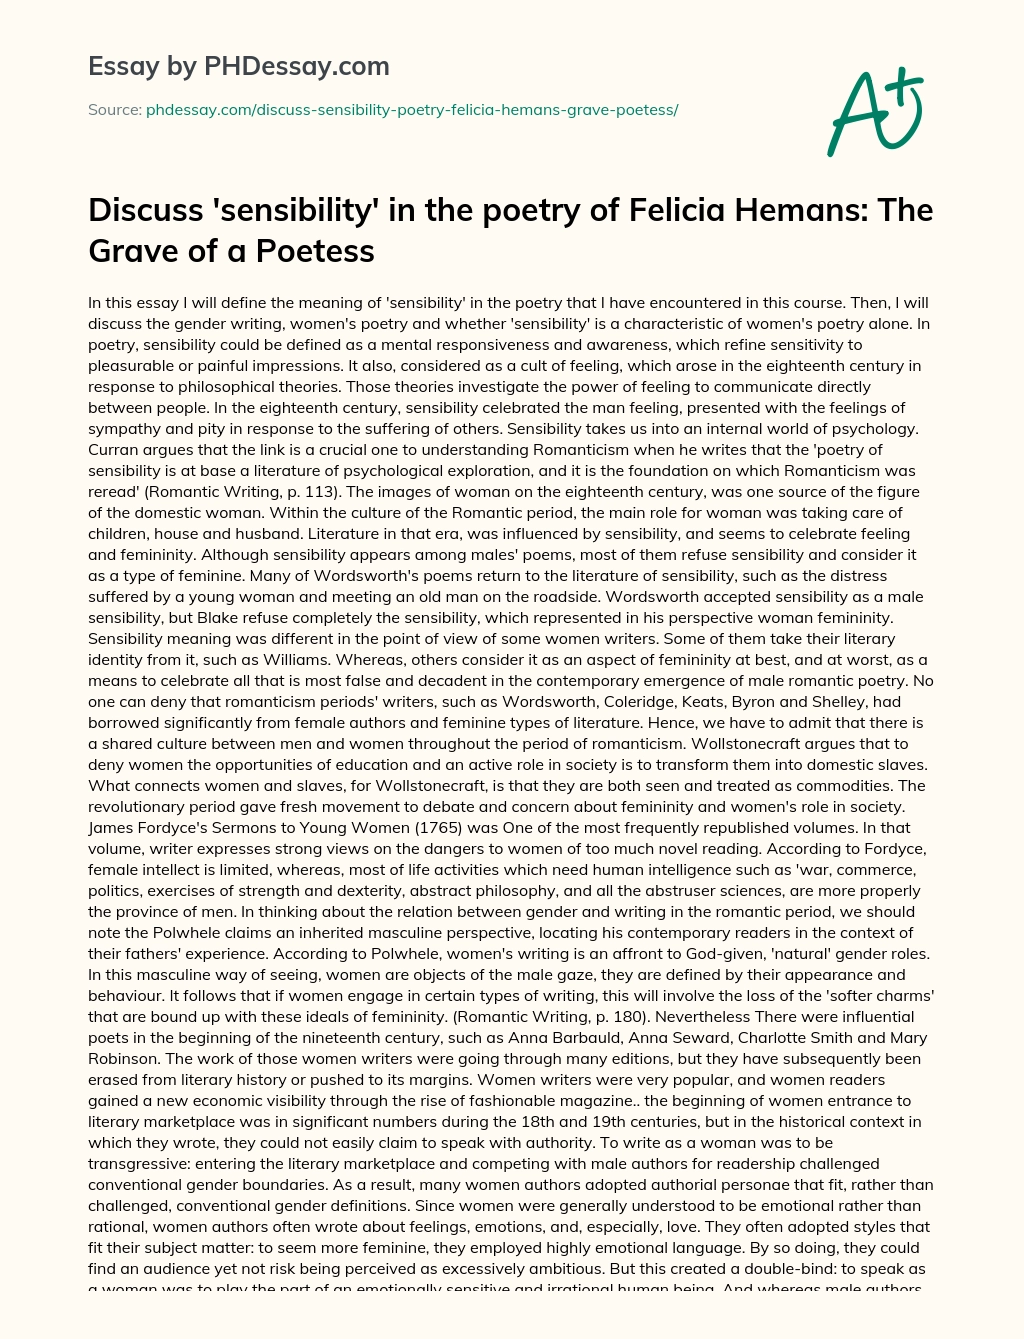 Discuss ‘sensibility’ in the poetry of Felicia Hemans: The Grave of a Poetess essay